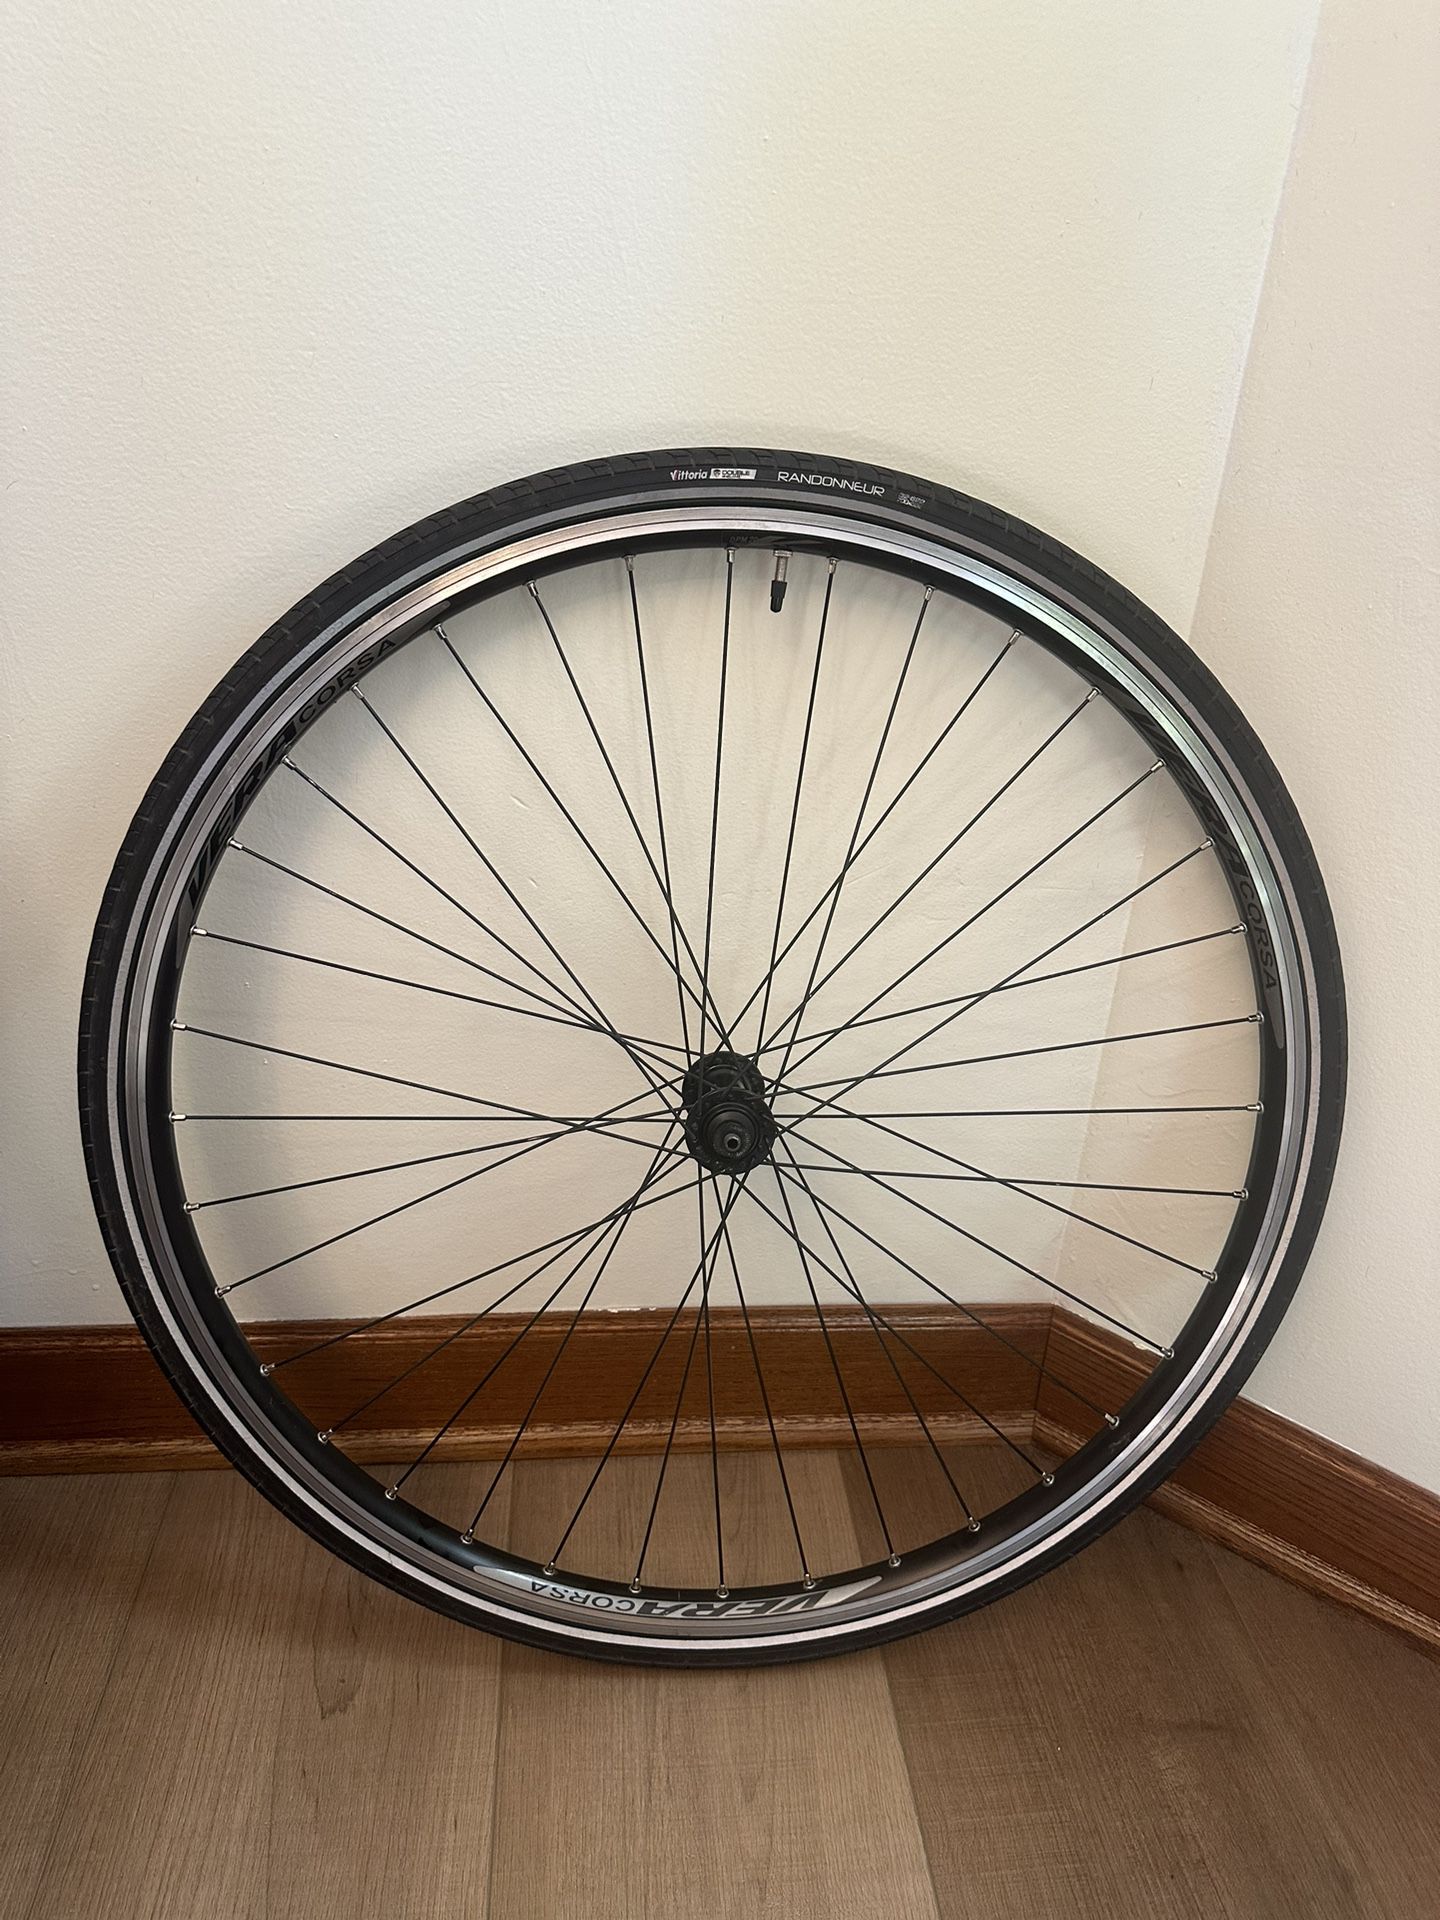 Bicycle one front Wheel 32", good for bicycle. like new with new inner tube.